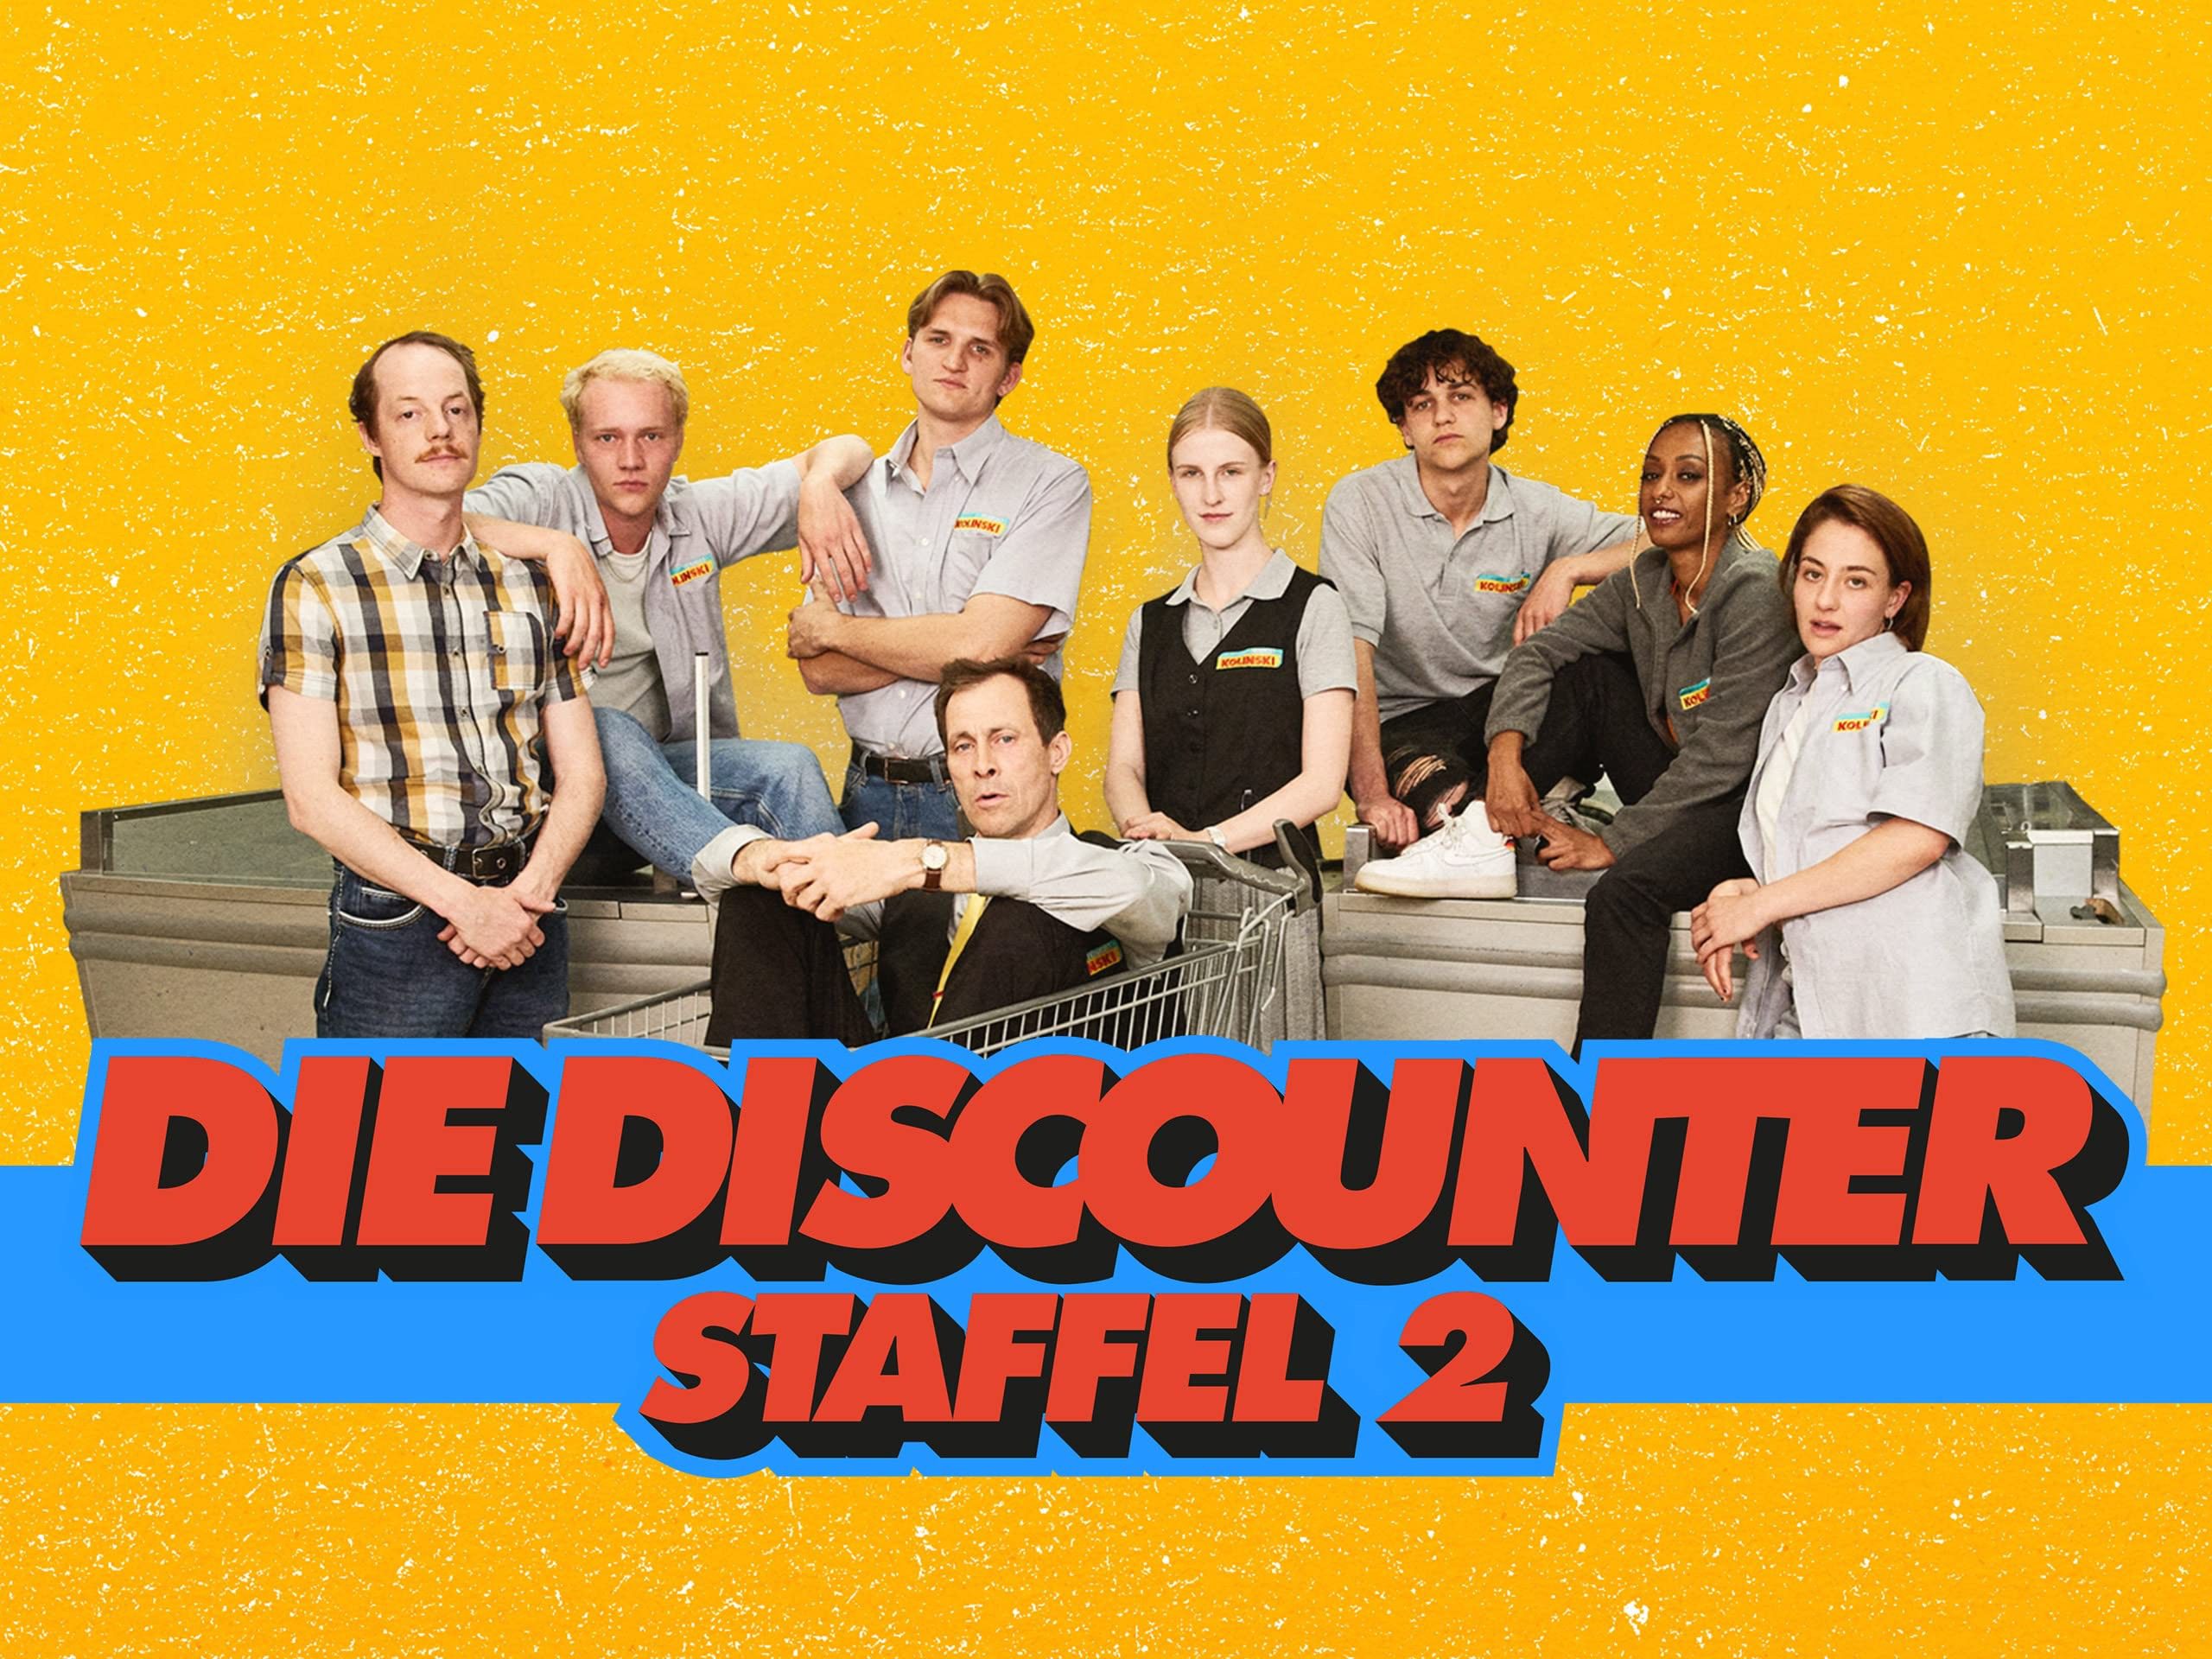 How To Watch Die Discounter Season 2 Episodes Online ?Streaming Guide